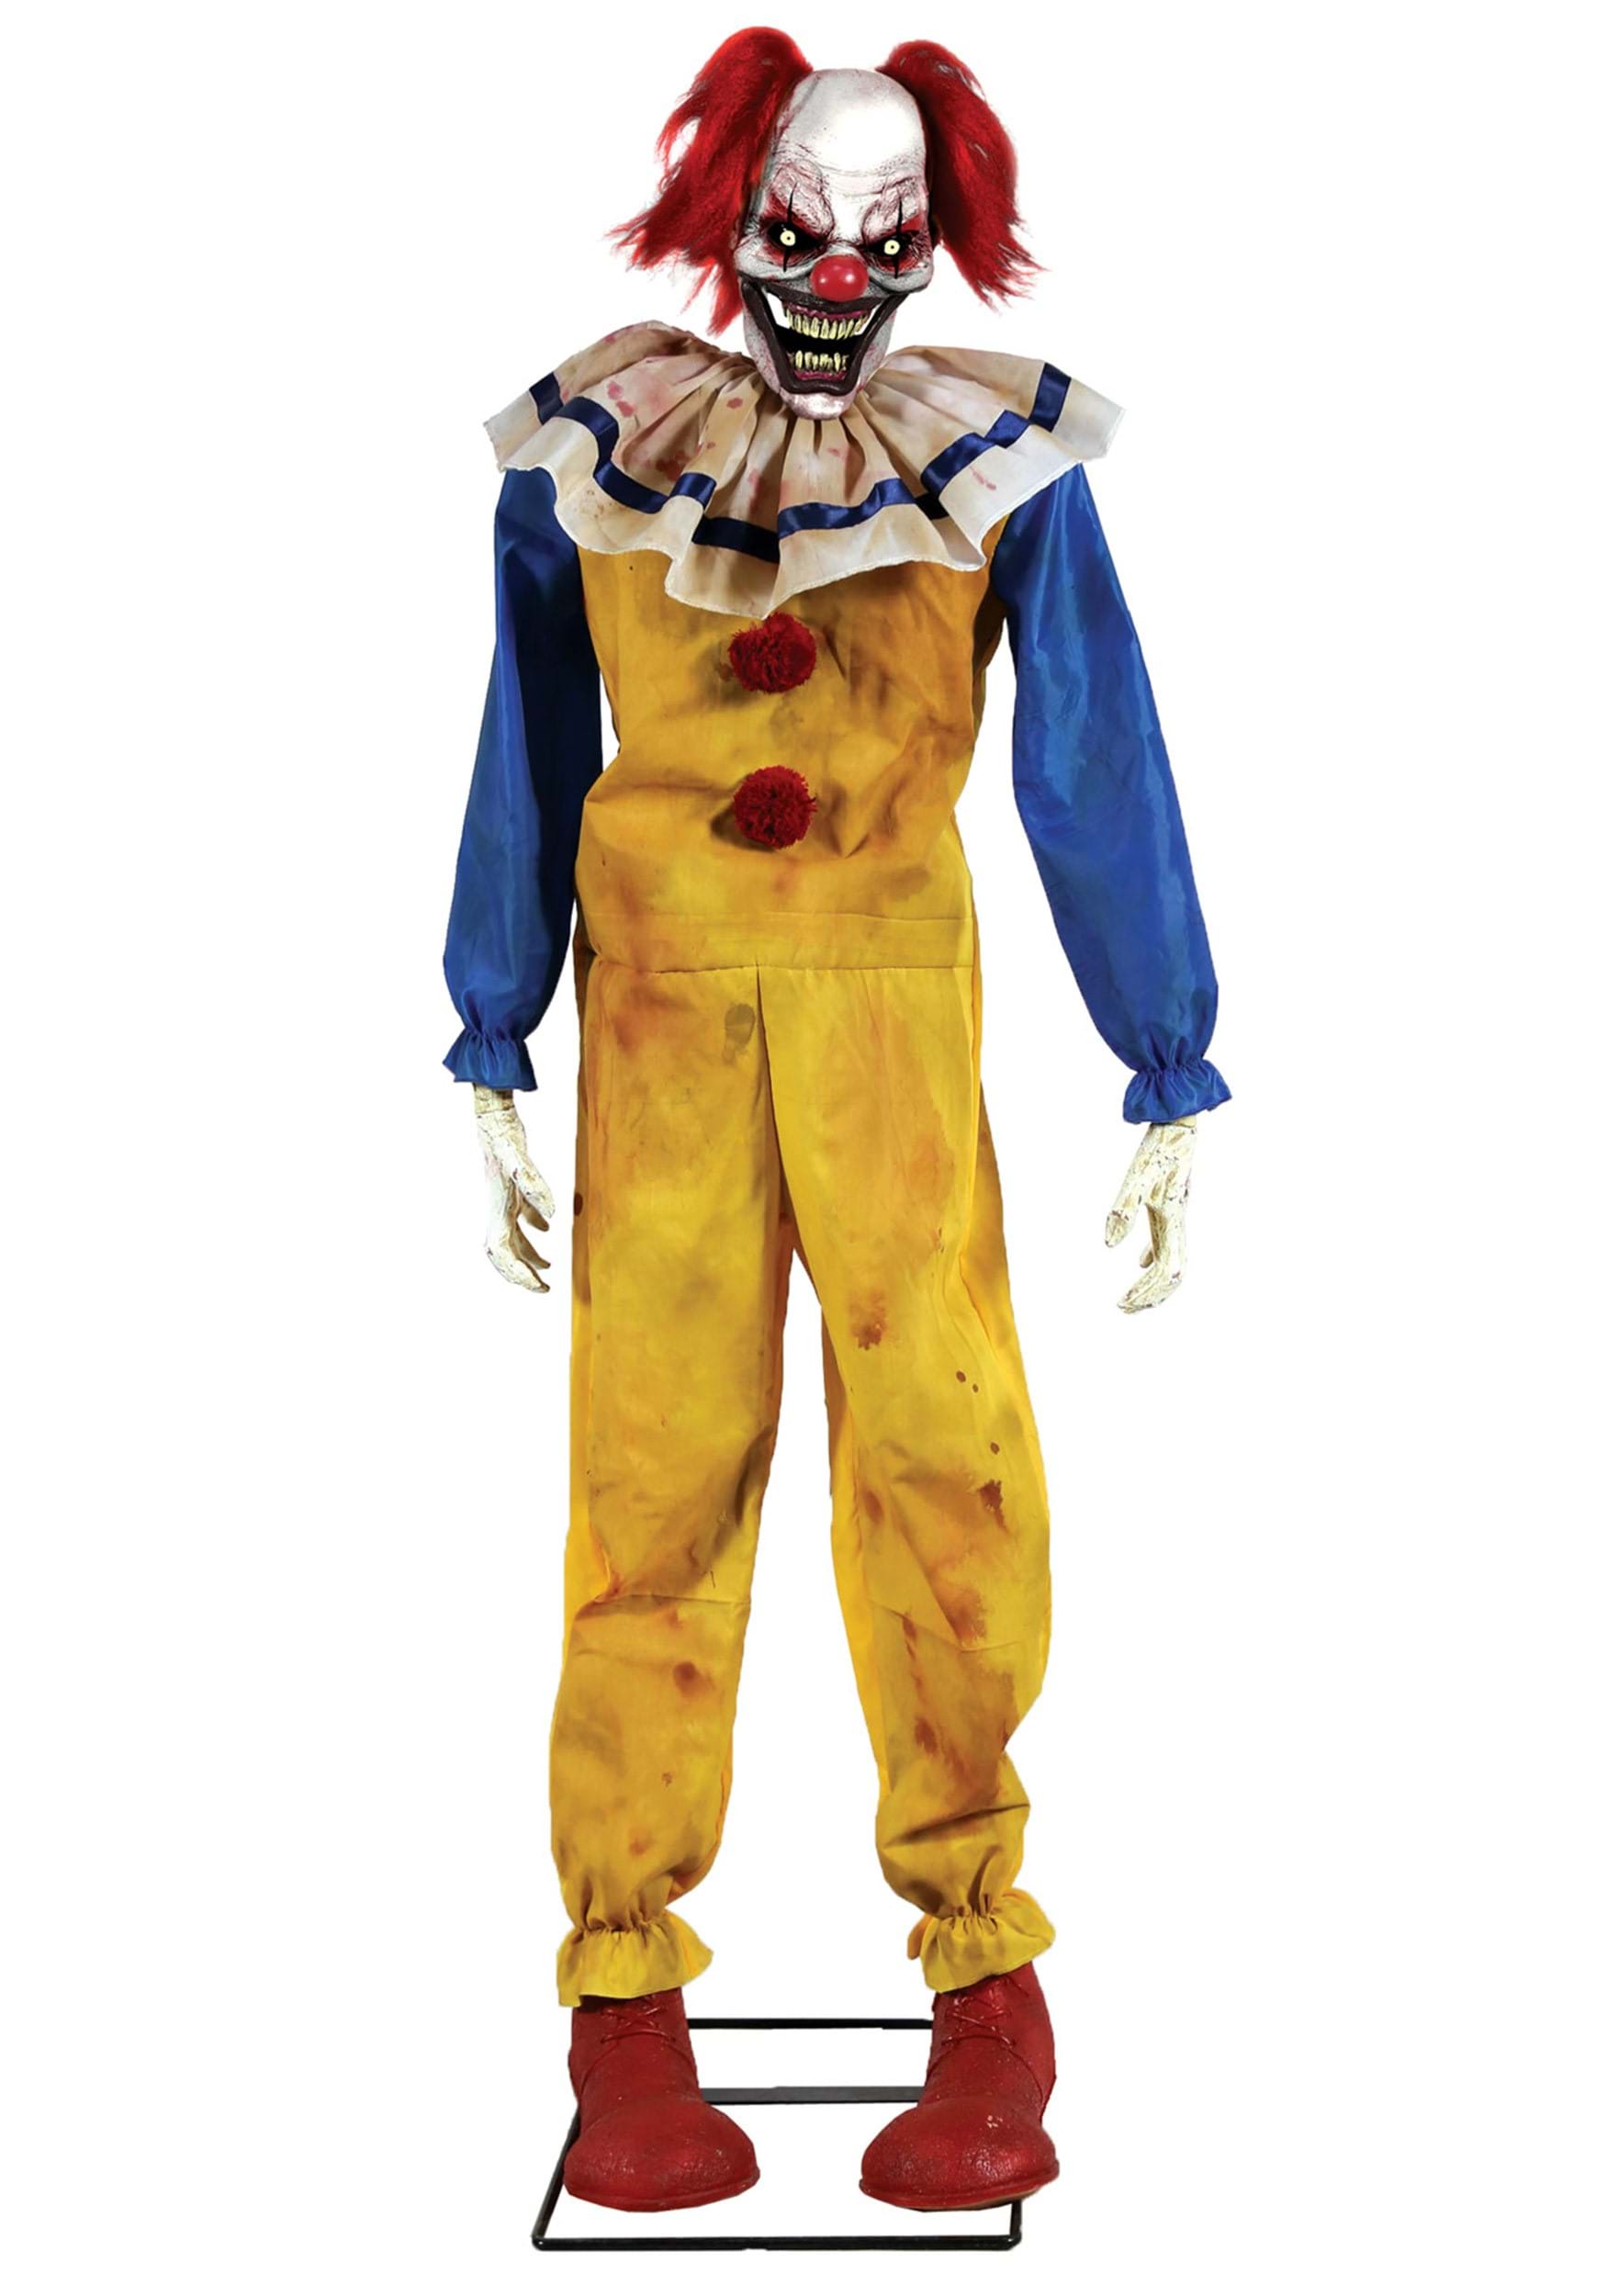 Scary Animated Twitching Clown Prop